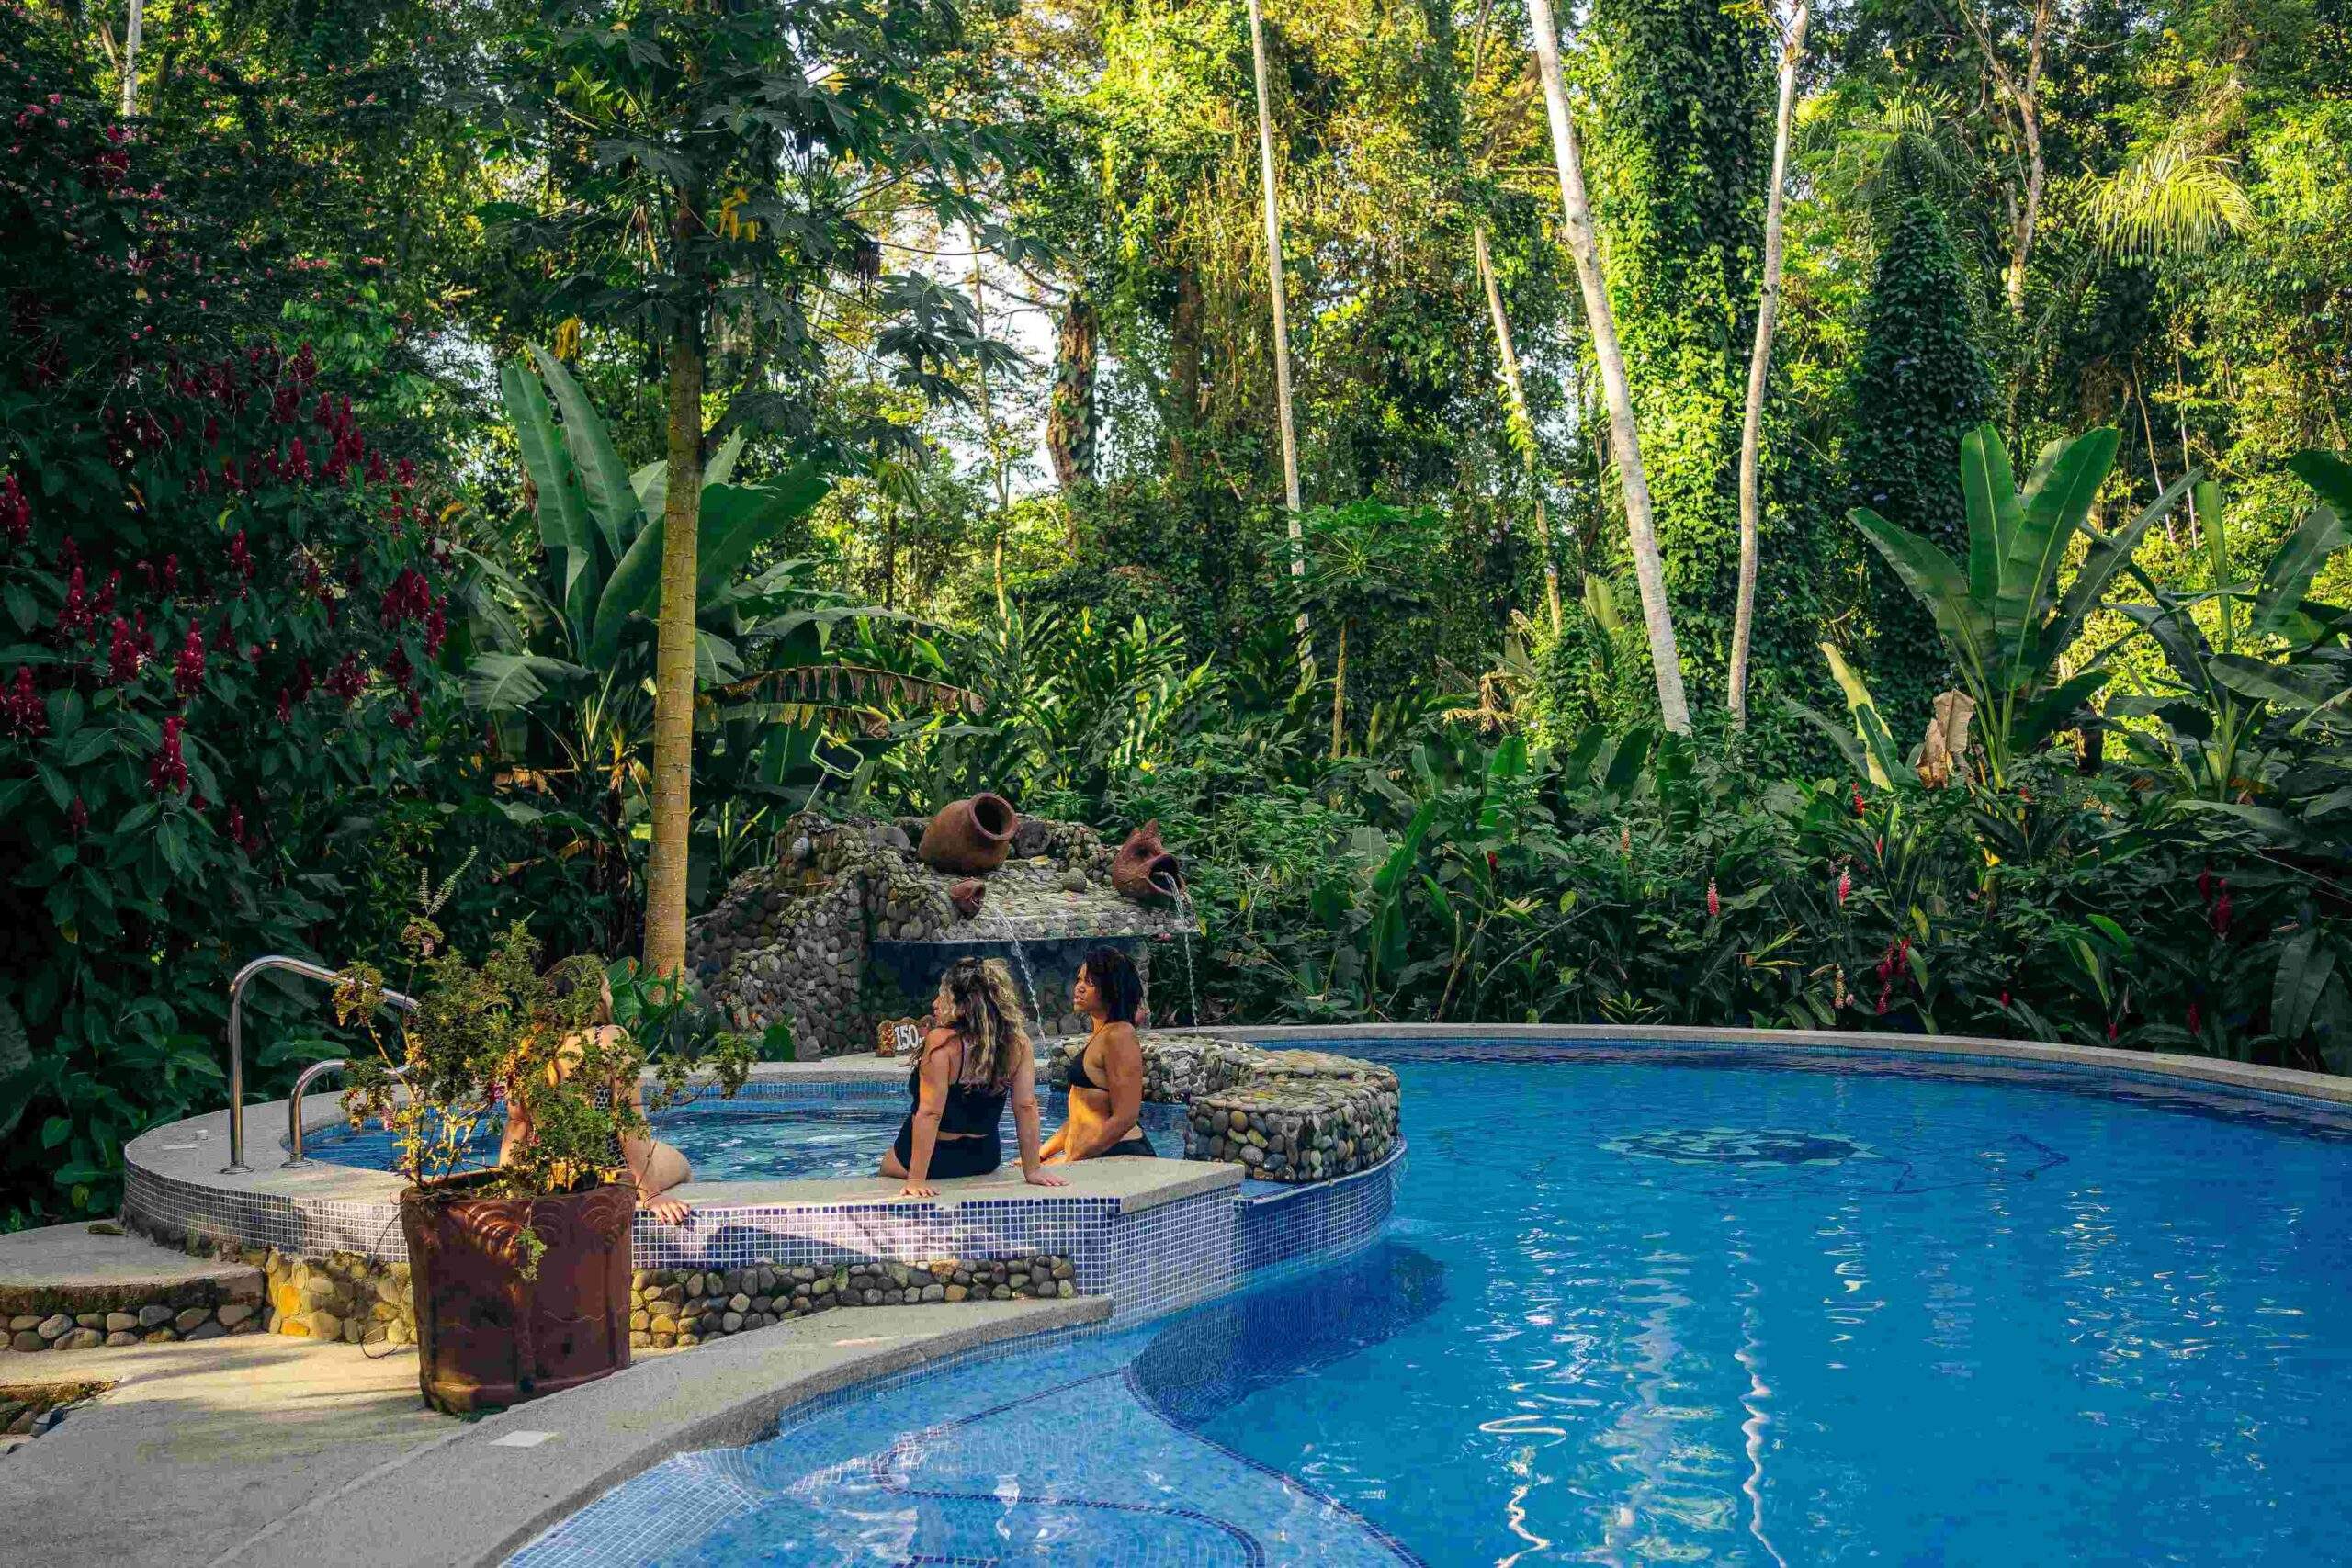 An outdoor swimming pool surrounded by dense tropical foliage